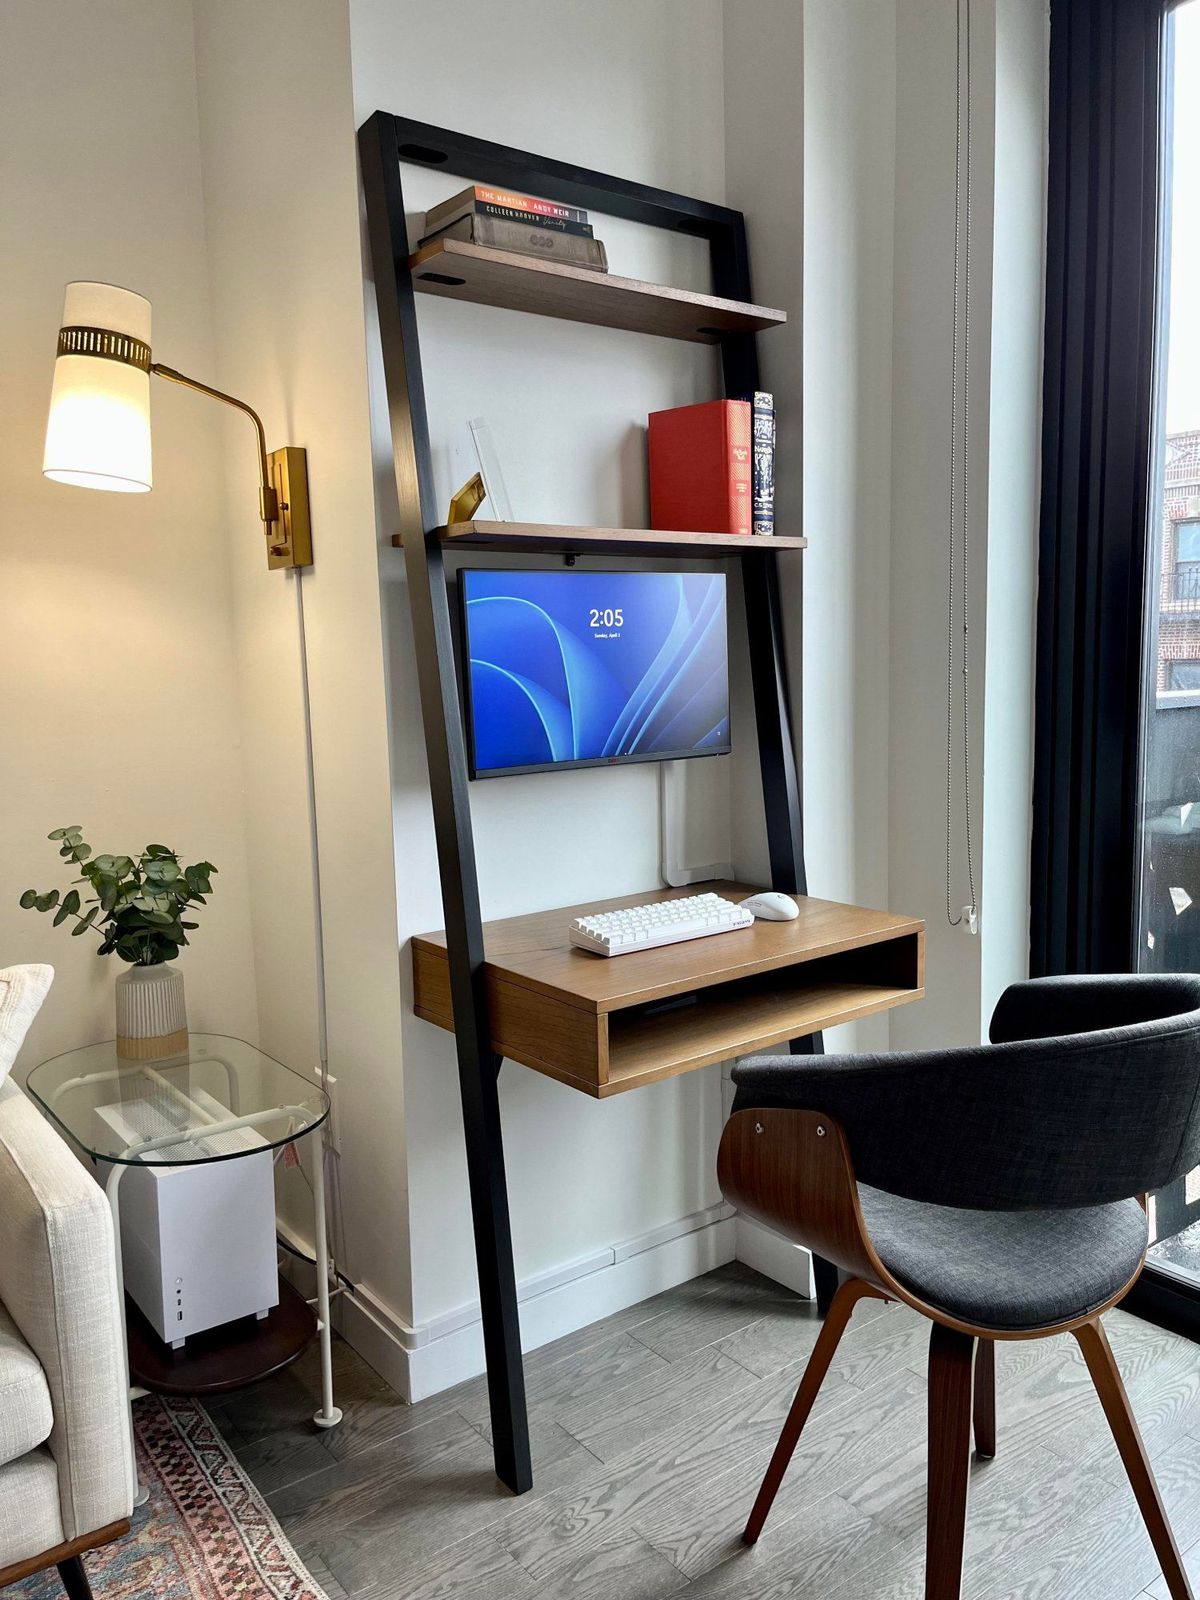 6 Top Gadgets That Will Work Wonders For Your Small Or Home Office